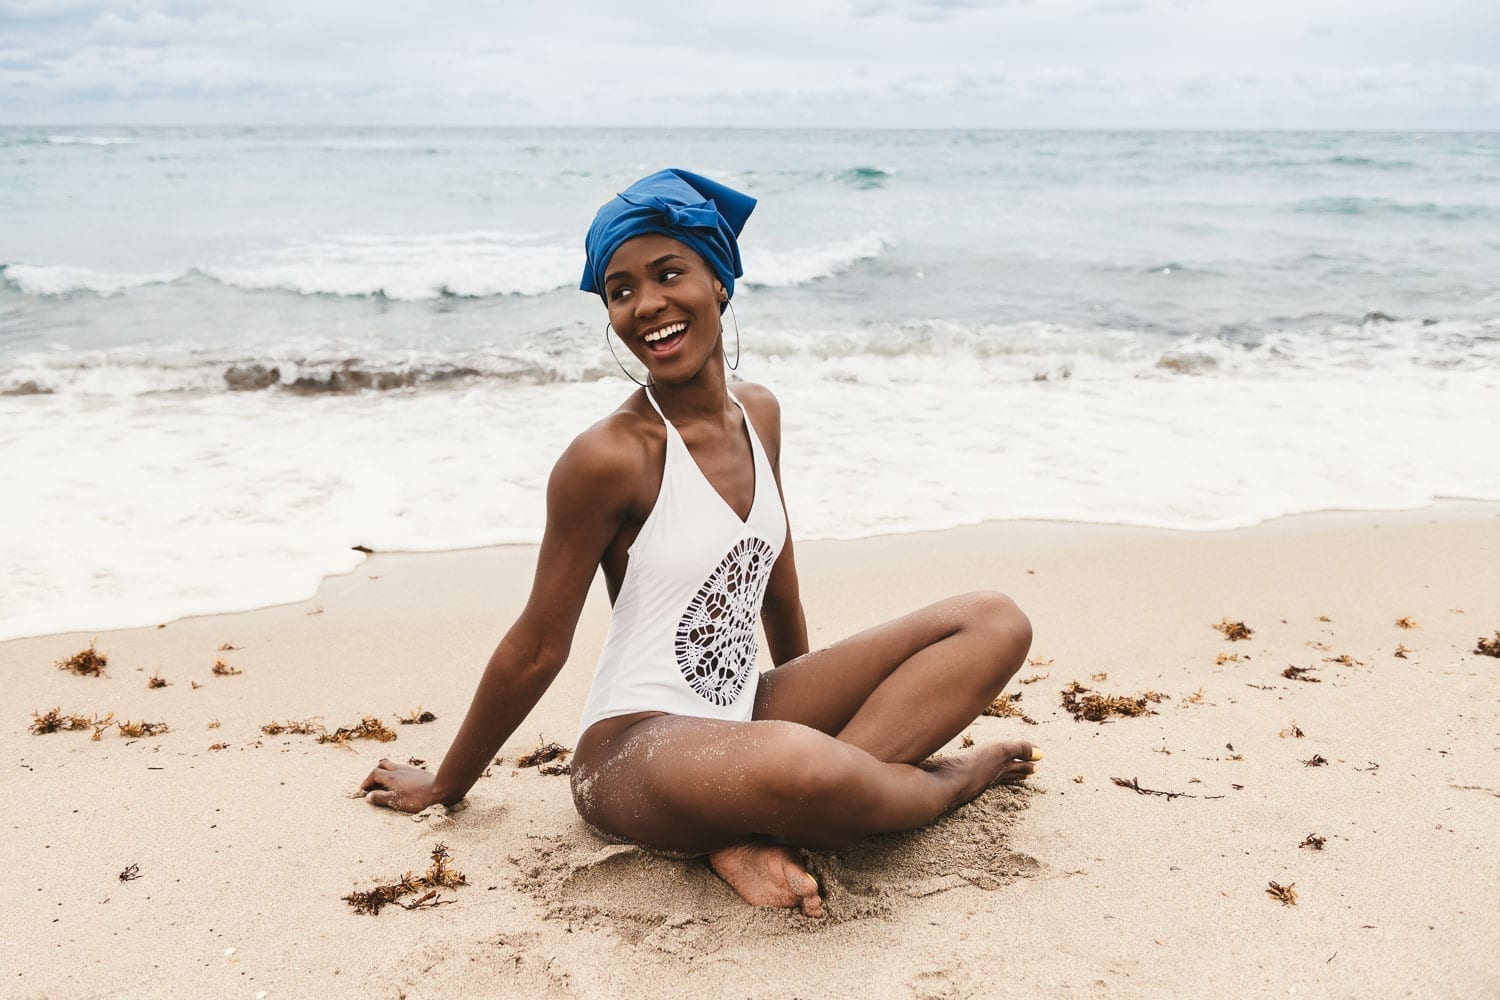 African American woman wearing a white bathing suit and blue head covering sitting in the sand smiling by the water